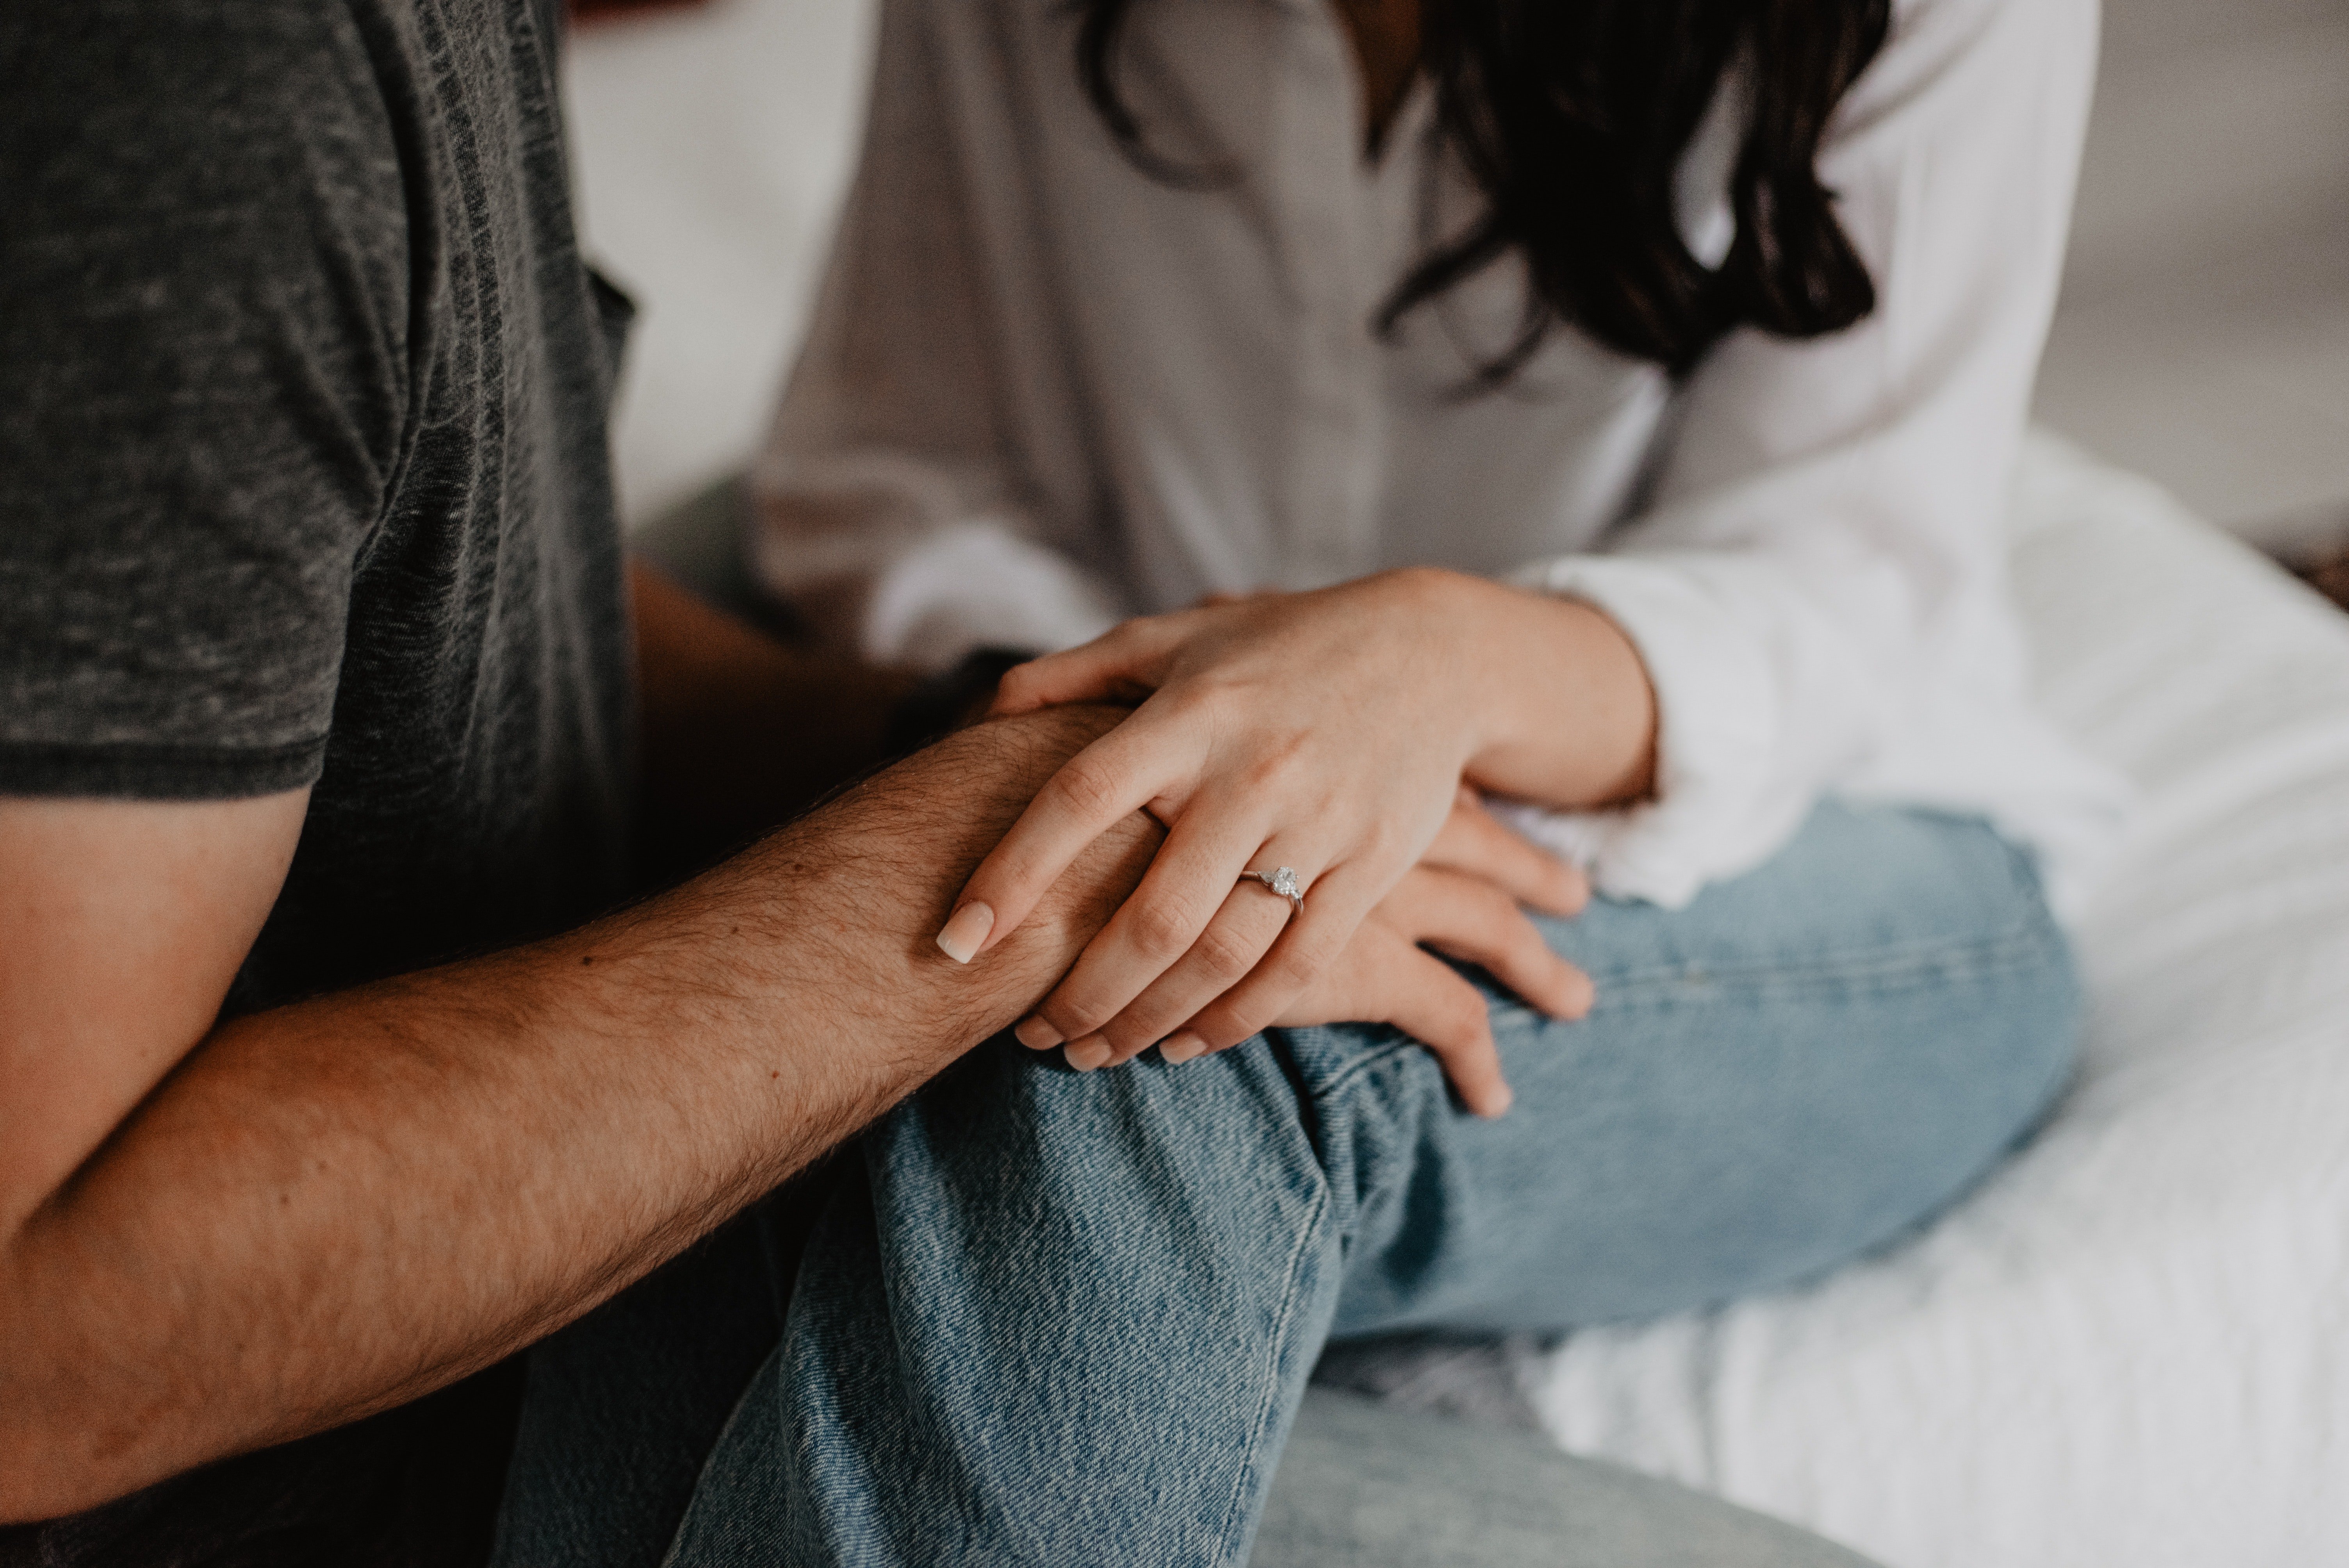 Edward started touching me inappropriately | Photo: Pexels